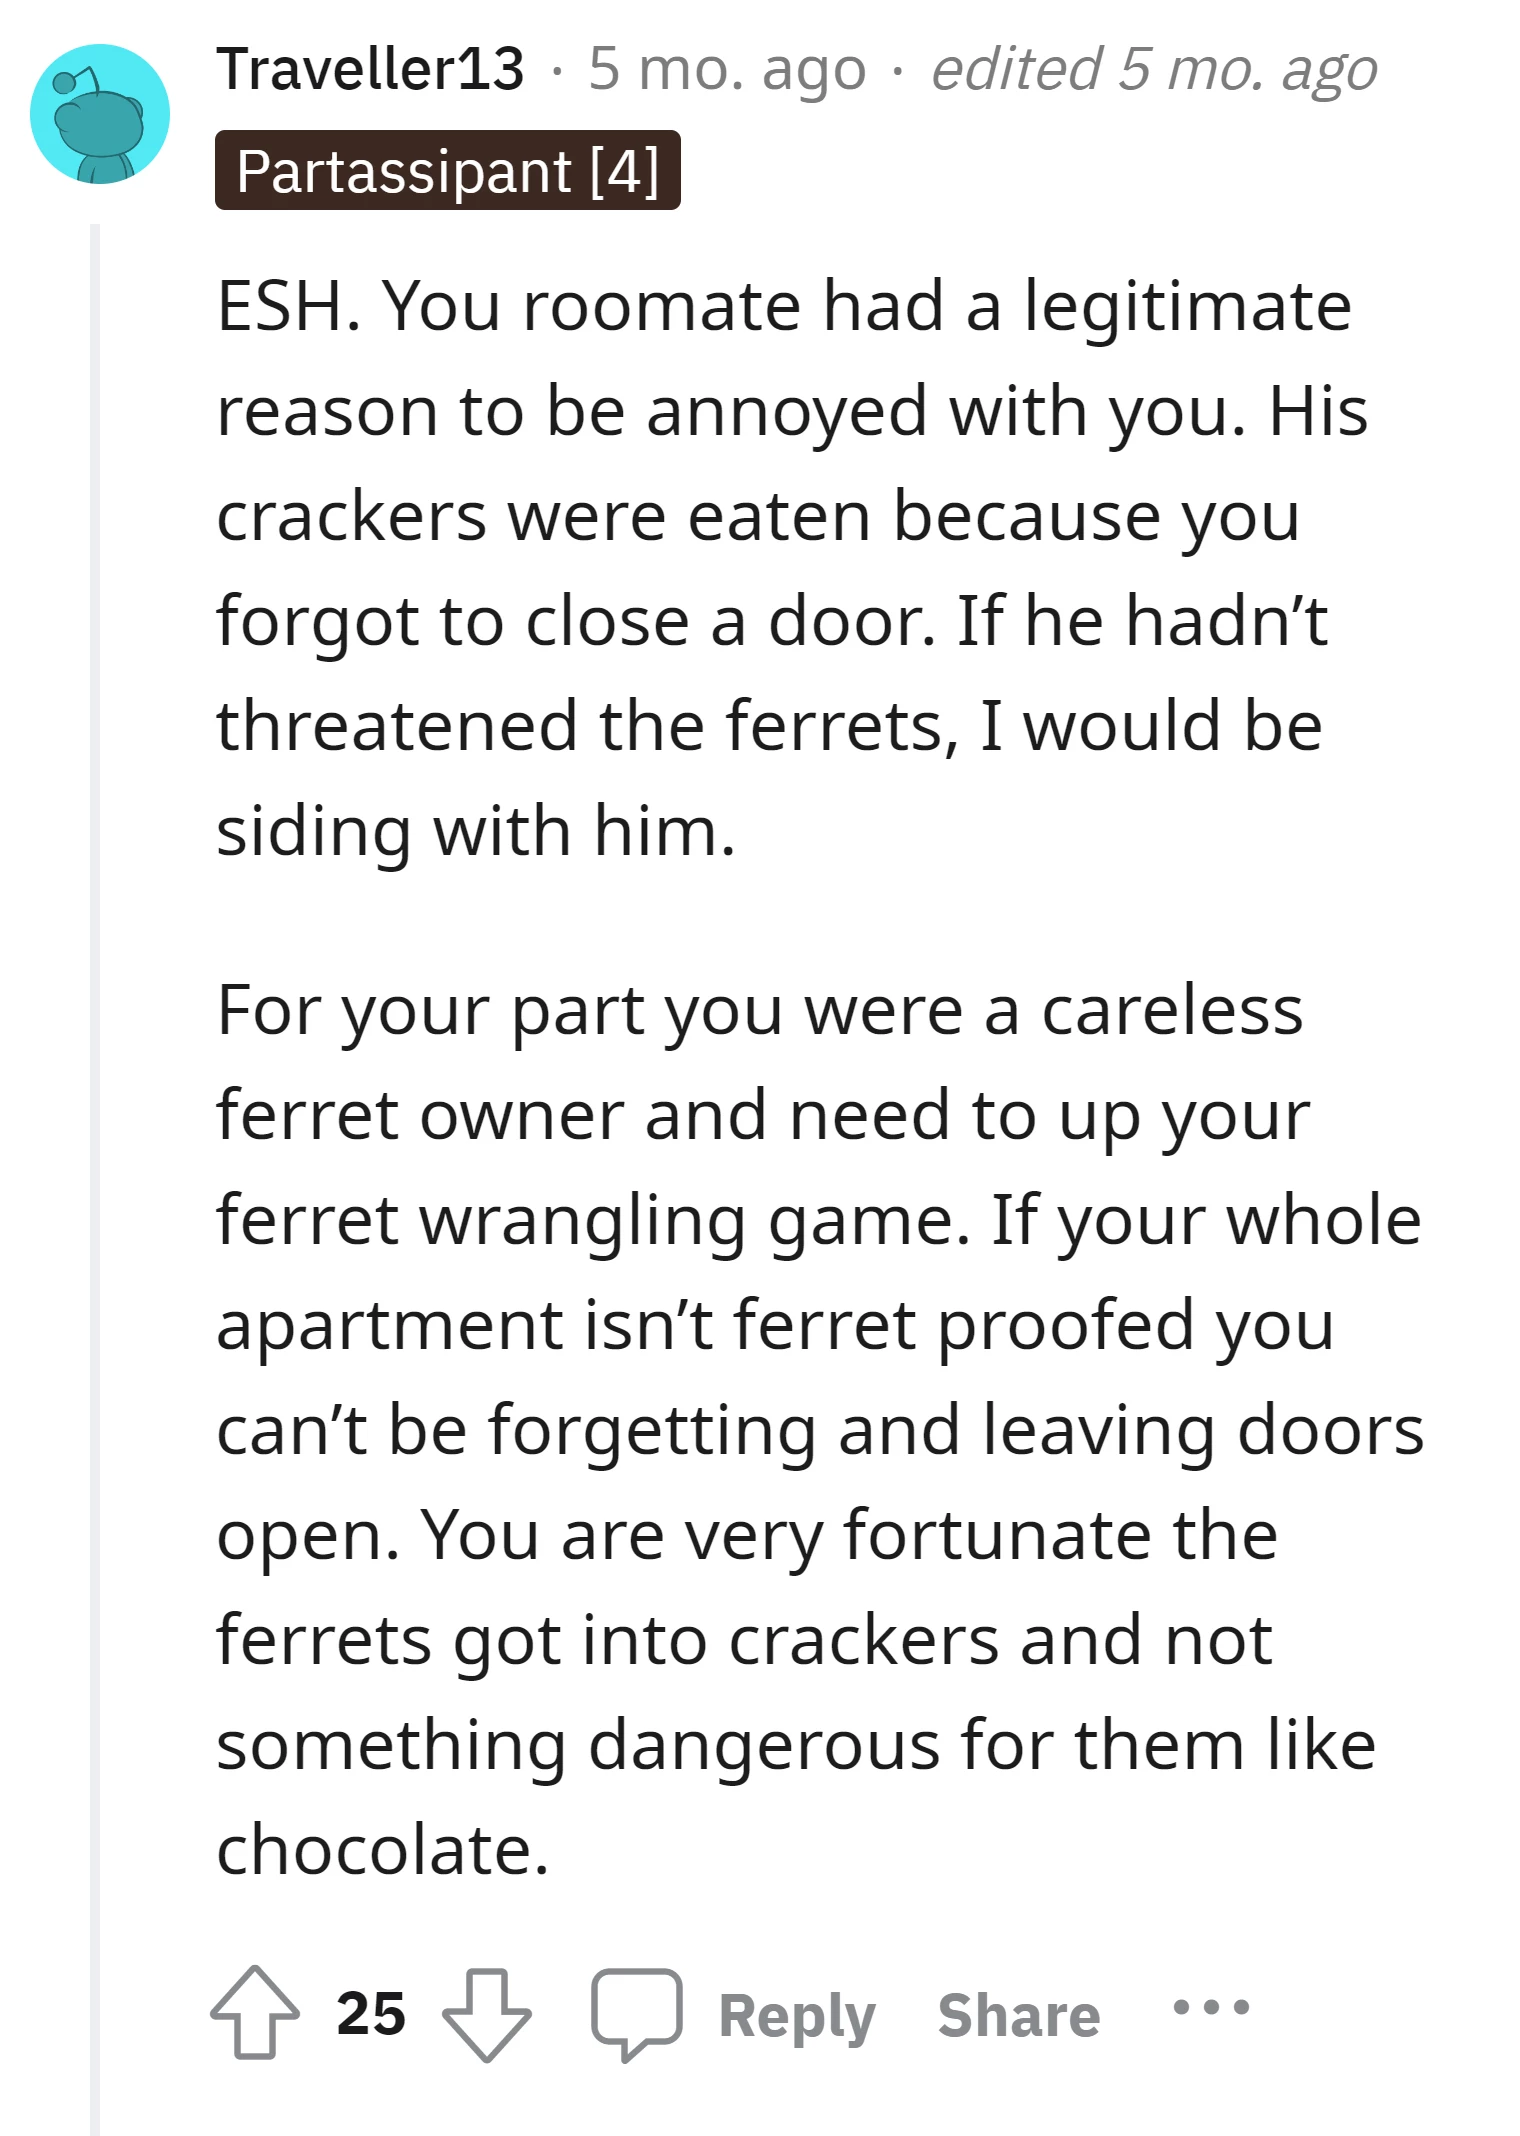 OP gets criticized for being a careless ferret owner